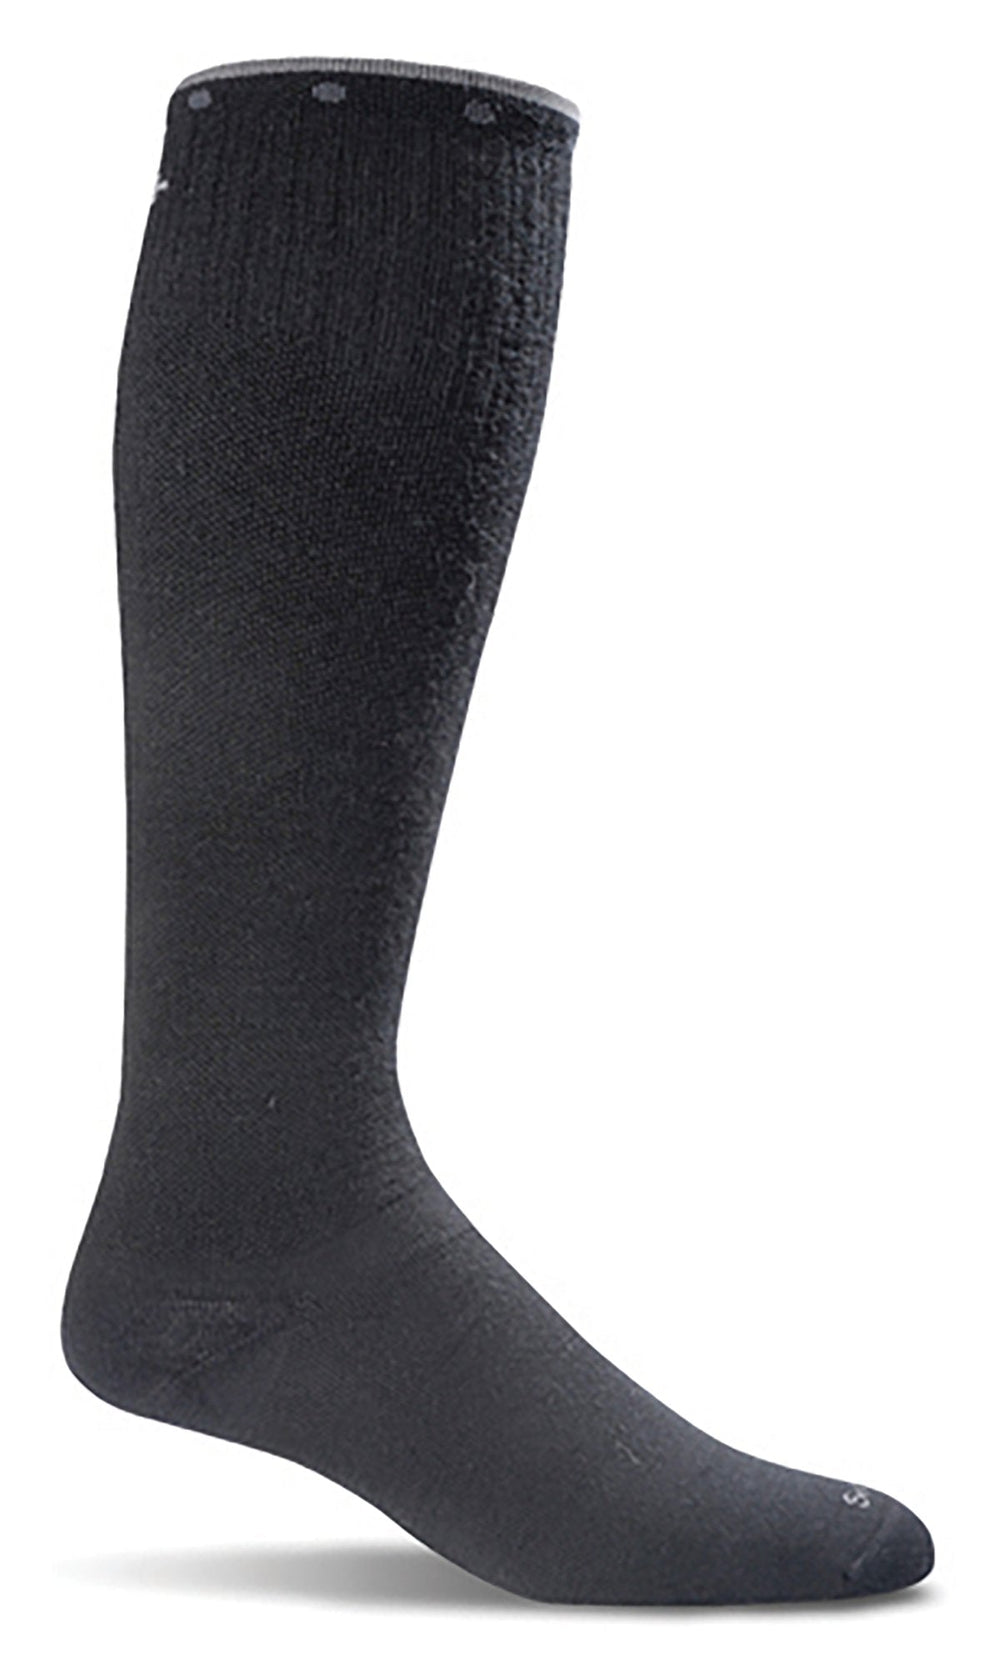 On the Spot Knee-High - Black Moderate Compression (15-20mmHg)